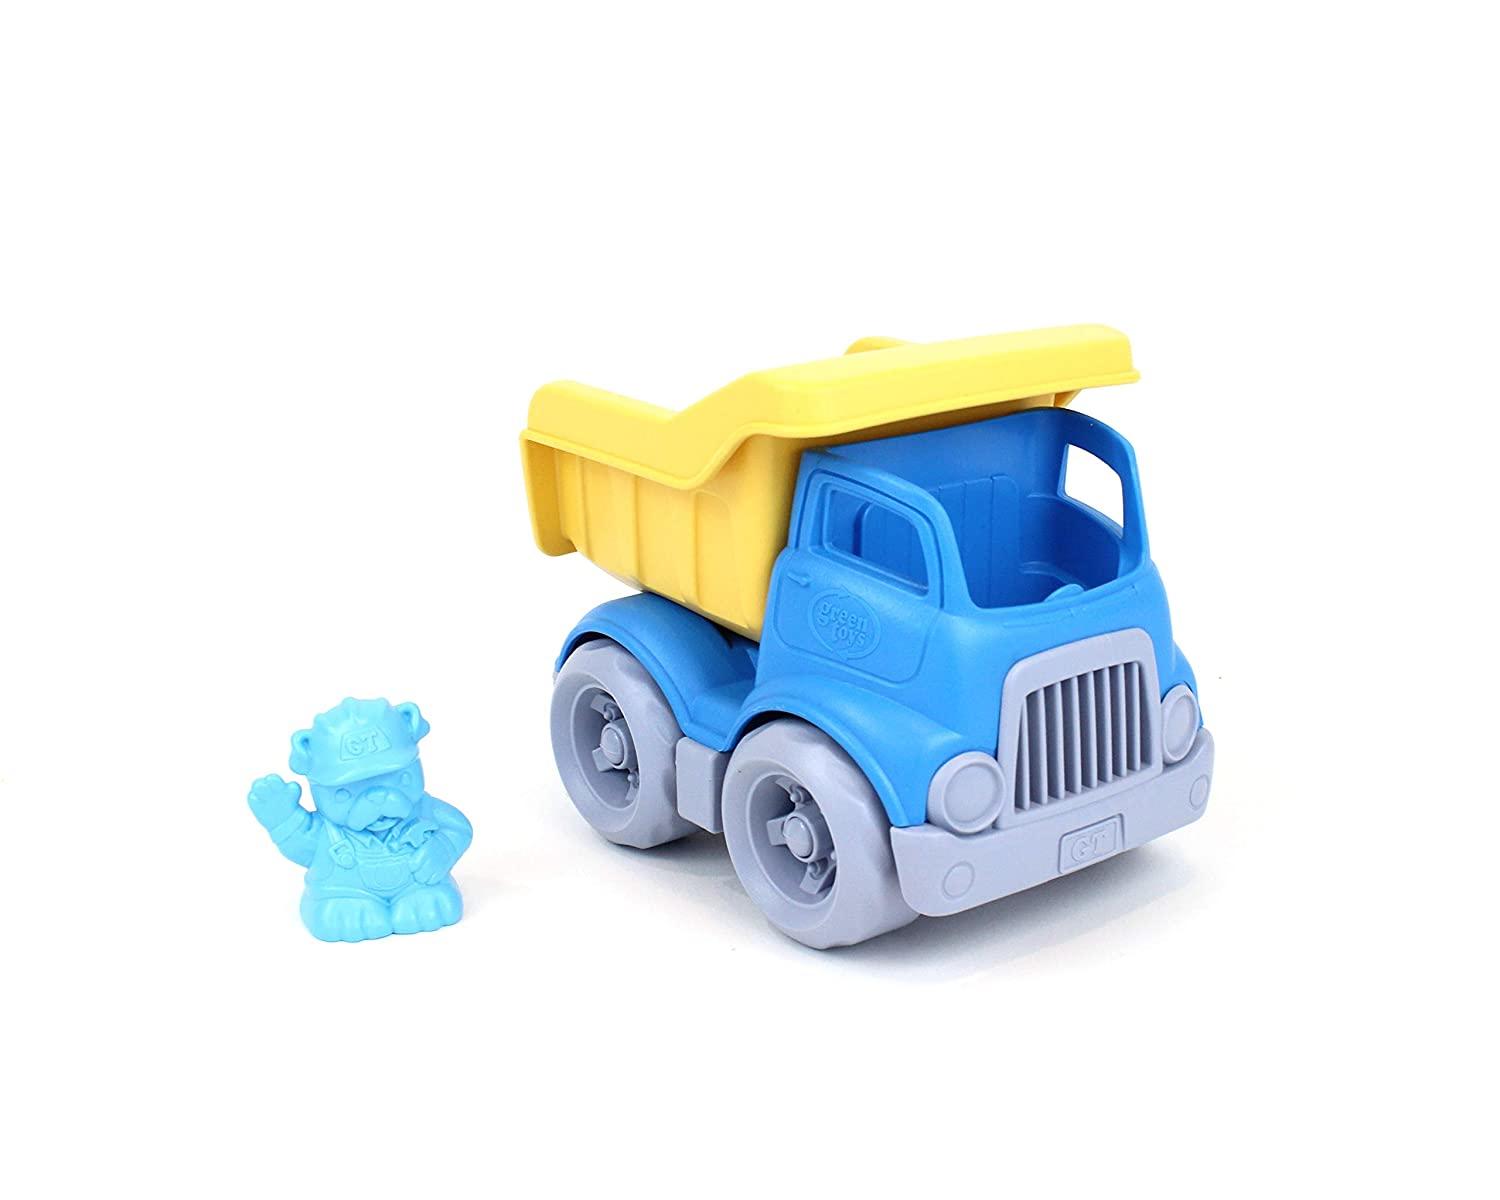 Blue and yellow eco-plastic dumper truck with removable blue fugure standing beside.